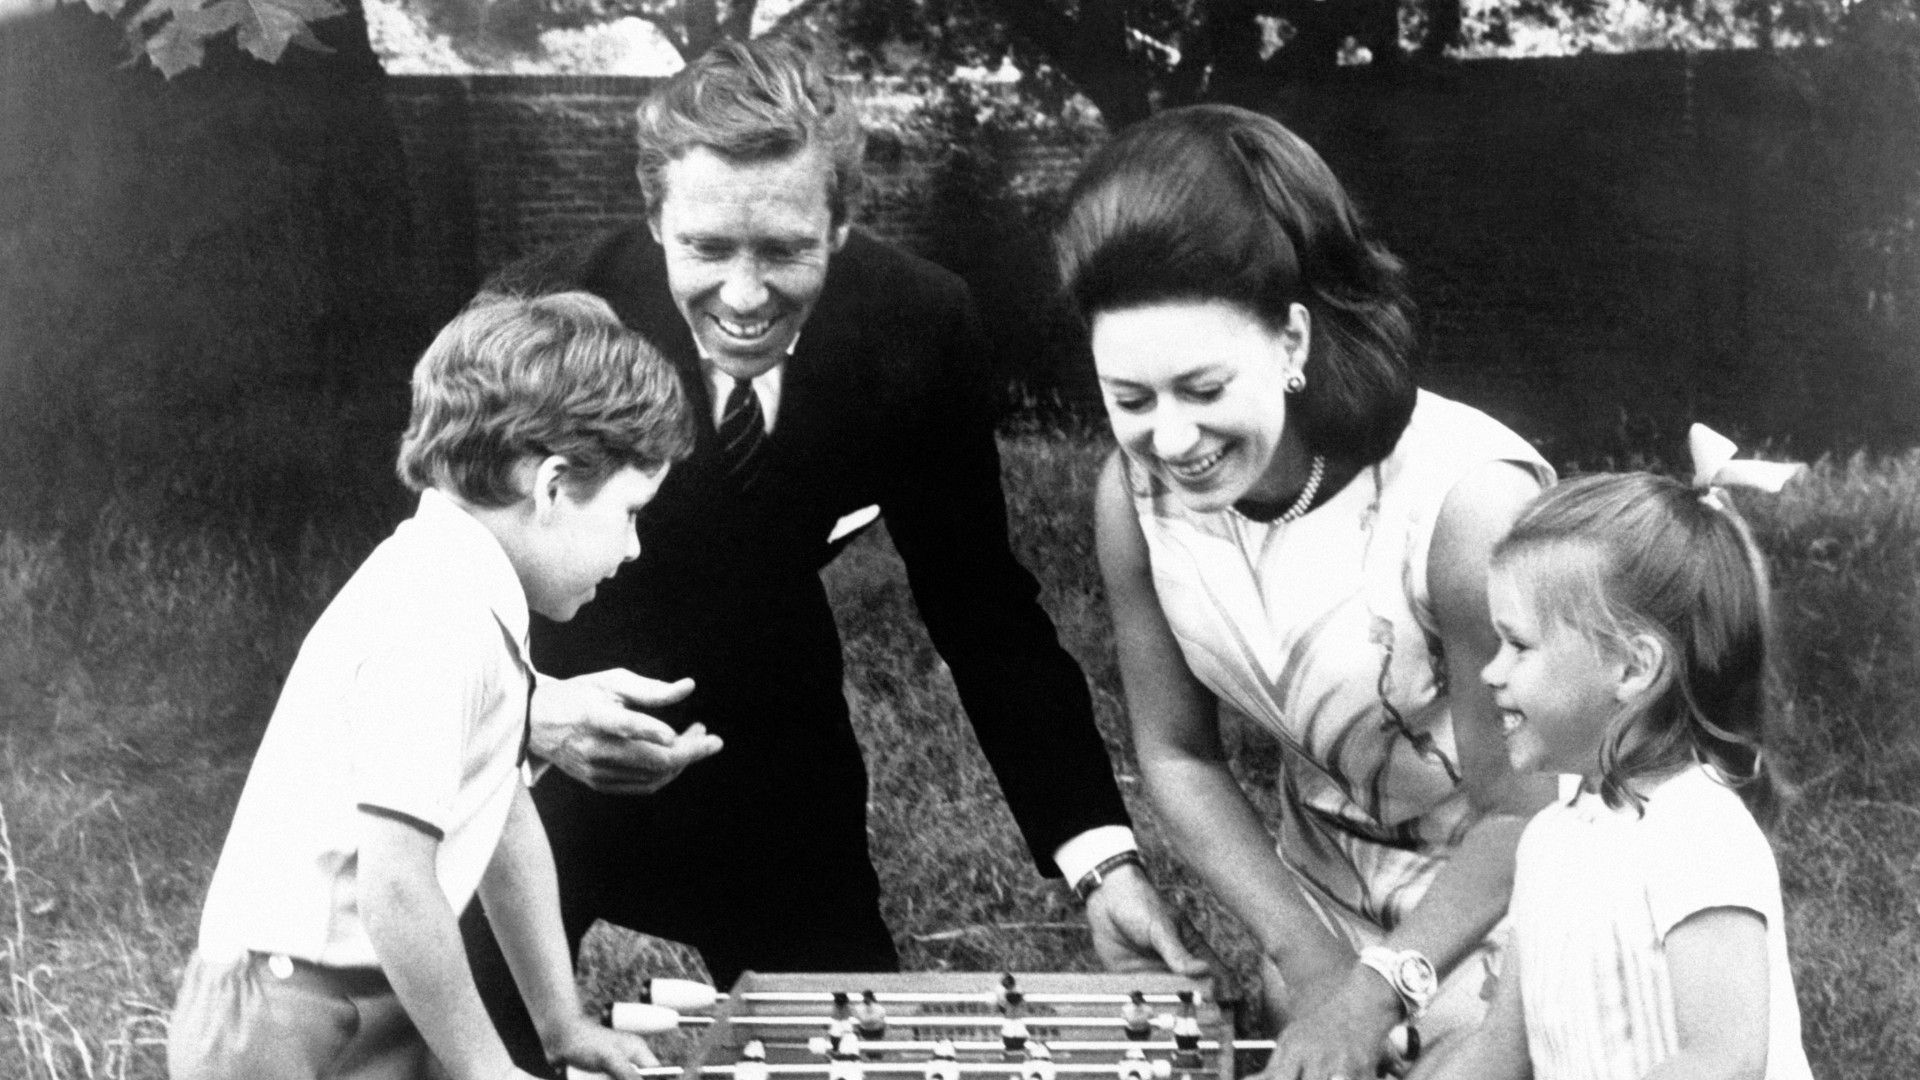 <p>                     While Princess Margaret may be more famous for her decadent morning rituals and iconic looks, she also loved spending quality time with the family.                   </p>                                      <p>                     Margaret had two children from her first marriage - David Armstrong-Jones and Lady Sarah Chatto.                   </p>                                      <p>                     Lady Sarah, with a cute bow matching her mother's style, is all grins in the photo.                   </p>                                      <p>                     Per <a href="https://www.express.co.uk/life-style/life/1626786/princess-margaret-parenting-david-armstrong-jones-lady-sarah-chatto-queen-elizabeth">the Express</a>, Margaret reportedly told the Queen before her death, "I may not have achieved very much - but I at least feel my life has not been wasted, because I have produced two happy and well-adjusted children."                   </p>